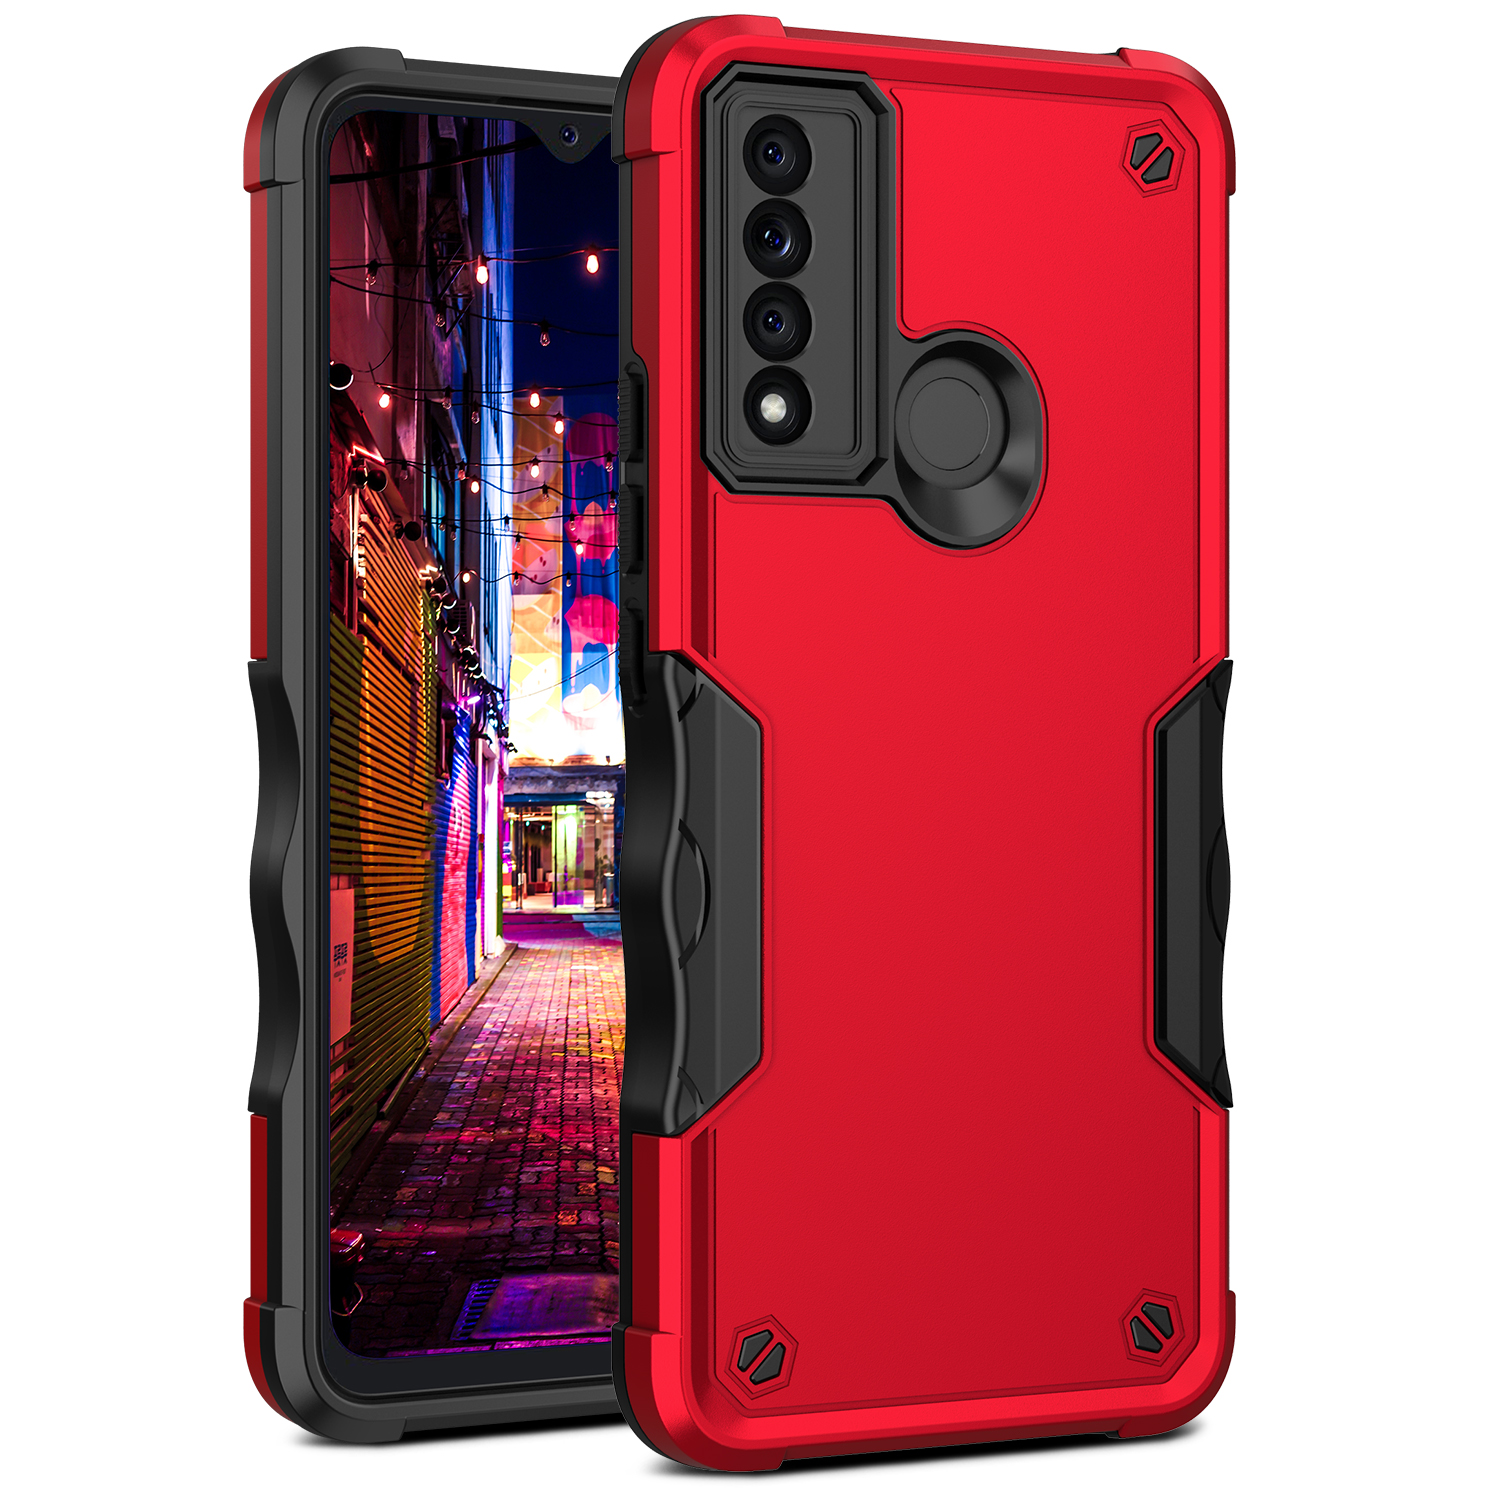 Strong Armor Grip Pattern Heavy Duty Shockproof Protective Cover Case for TCL 20 XE (Red)